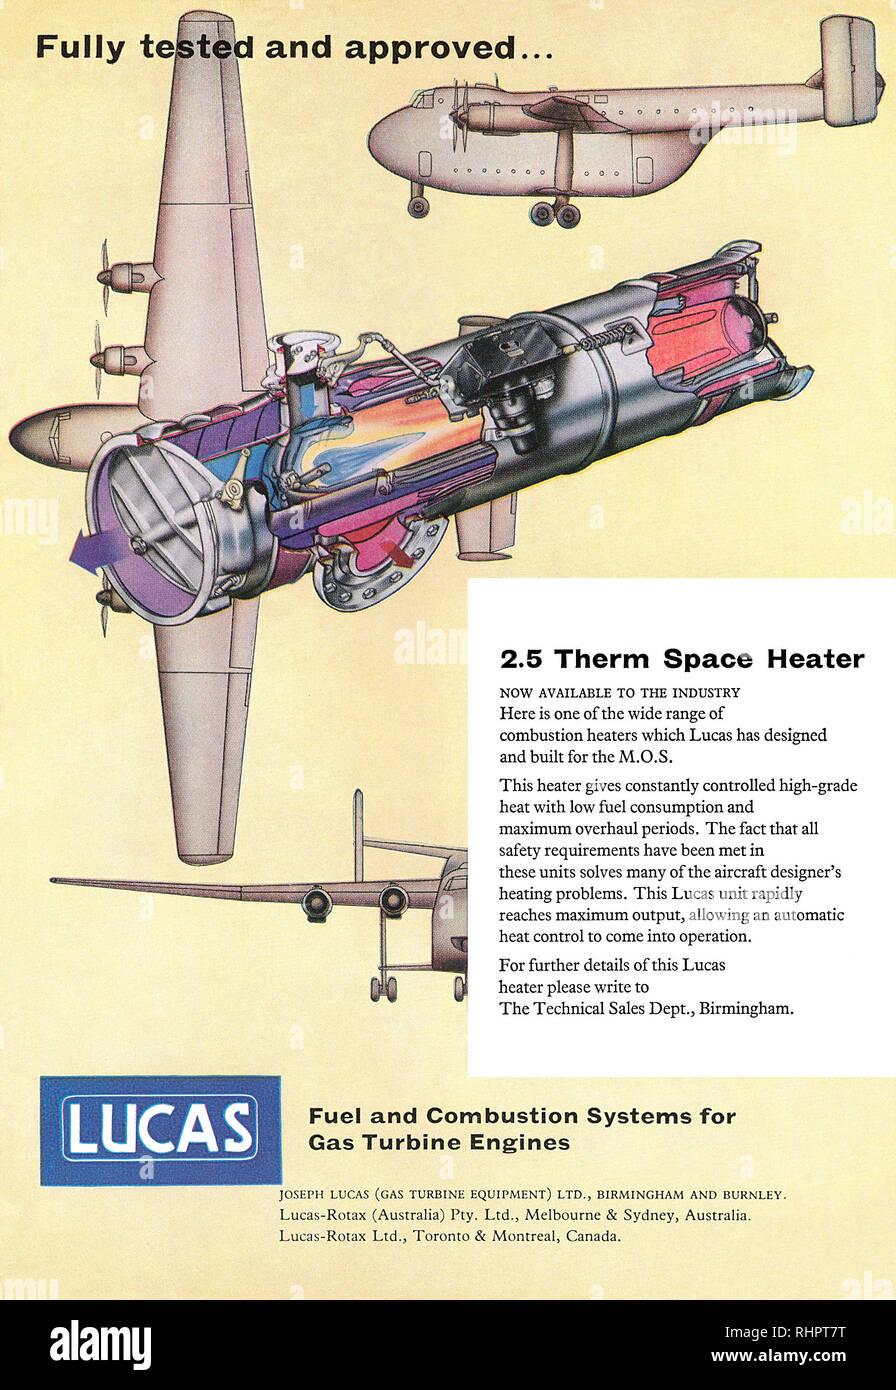 1956 British advertisement for Lucas gas turbine engines for aviation. Stock Photo